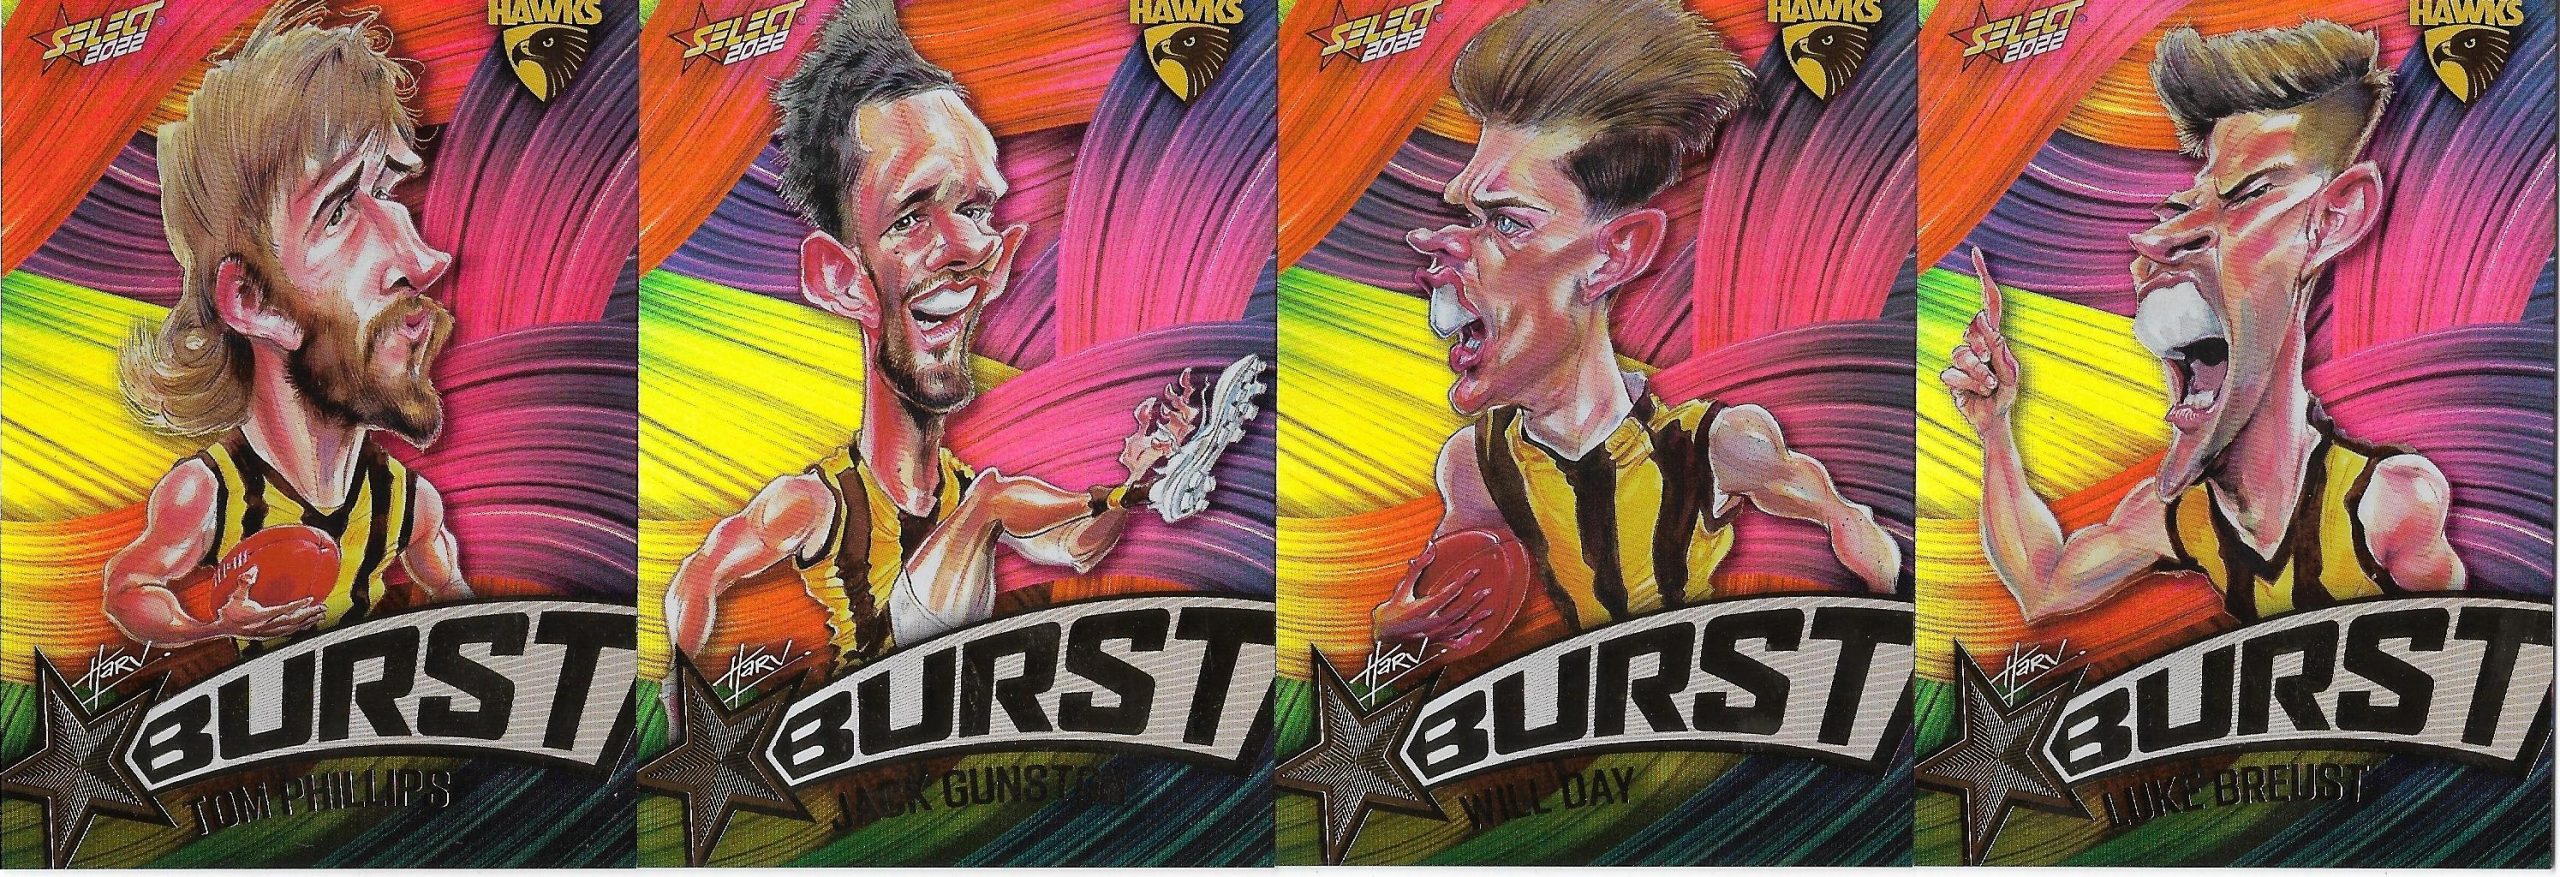 2022 Select Footy Stars Starburst Caricature – Paint Set Of 4 – Hawthorn